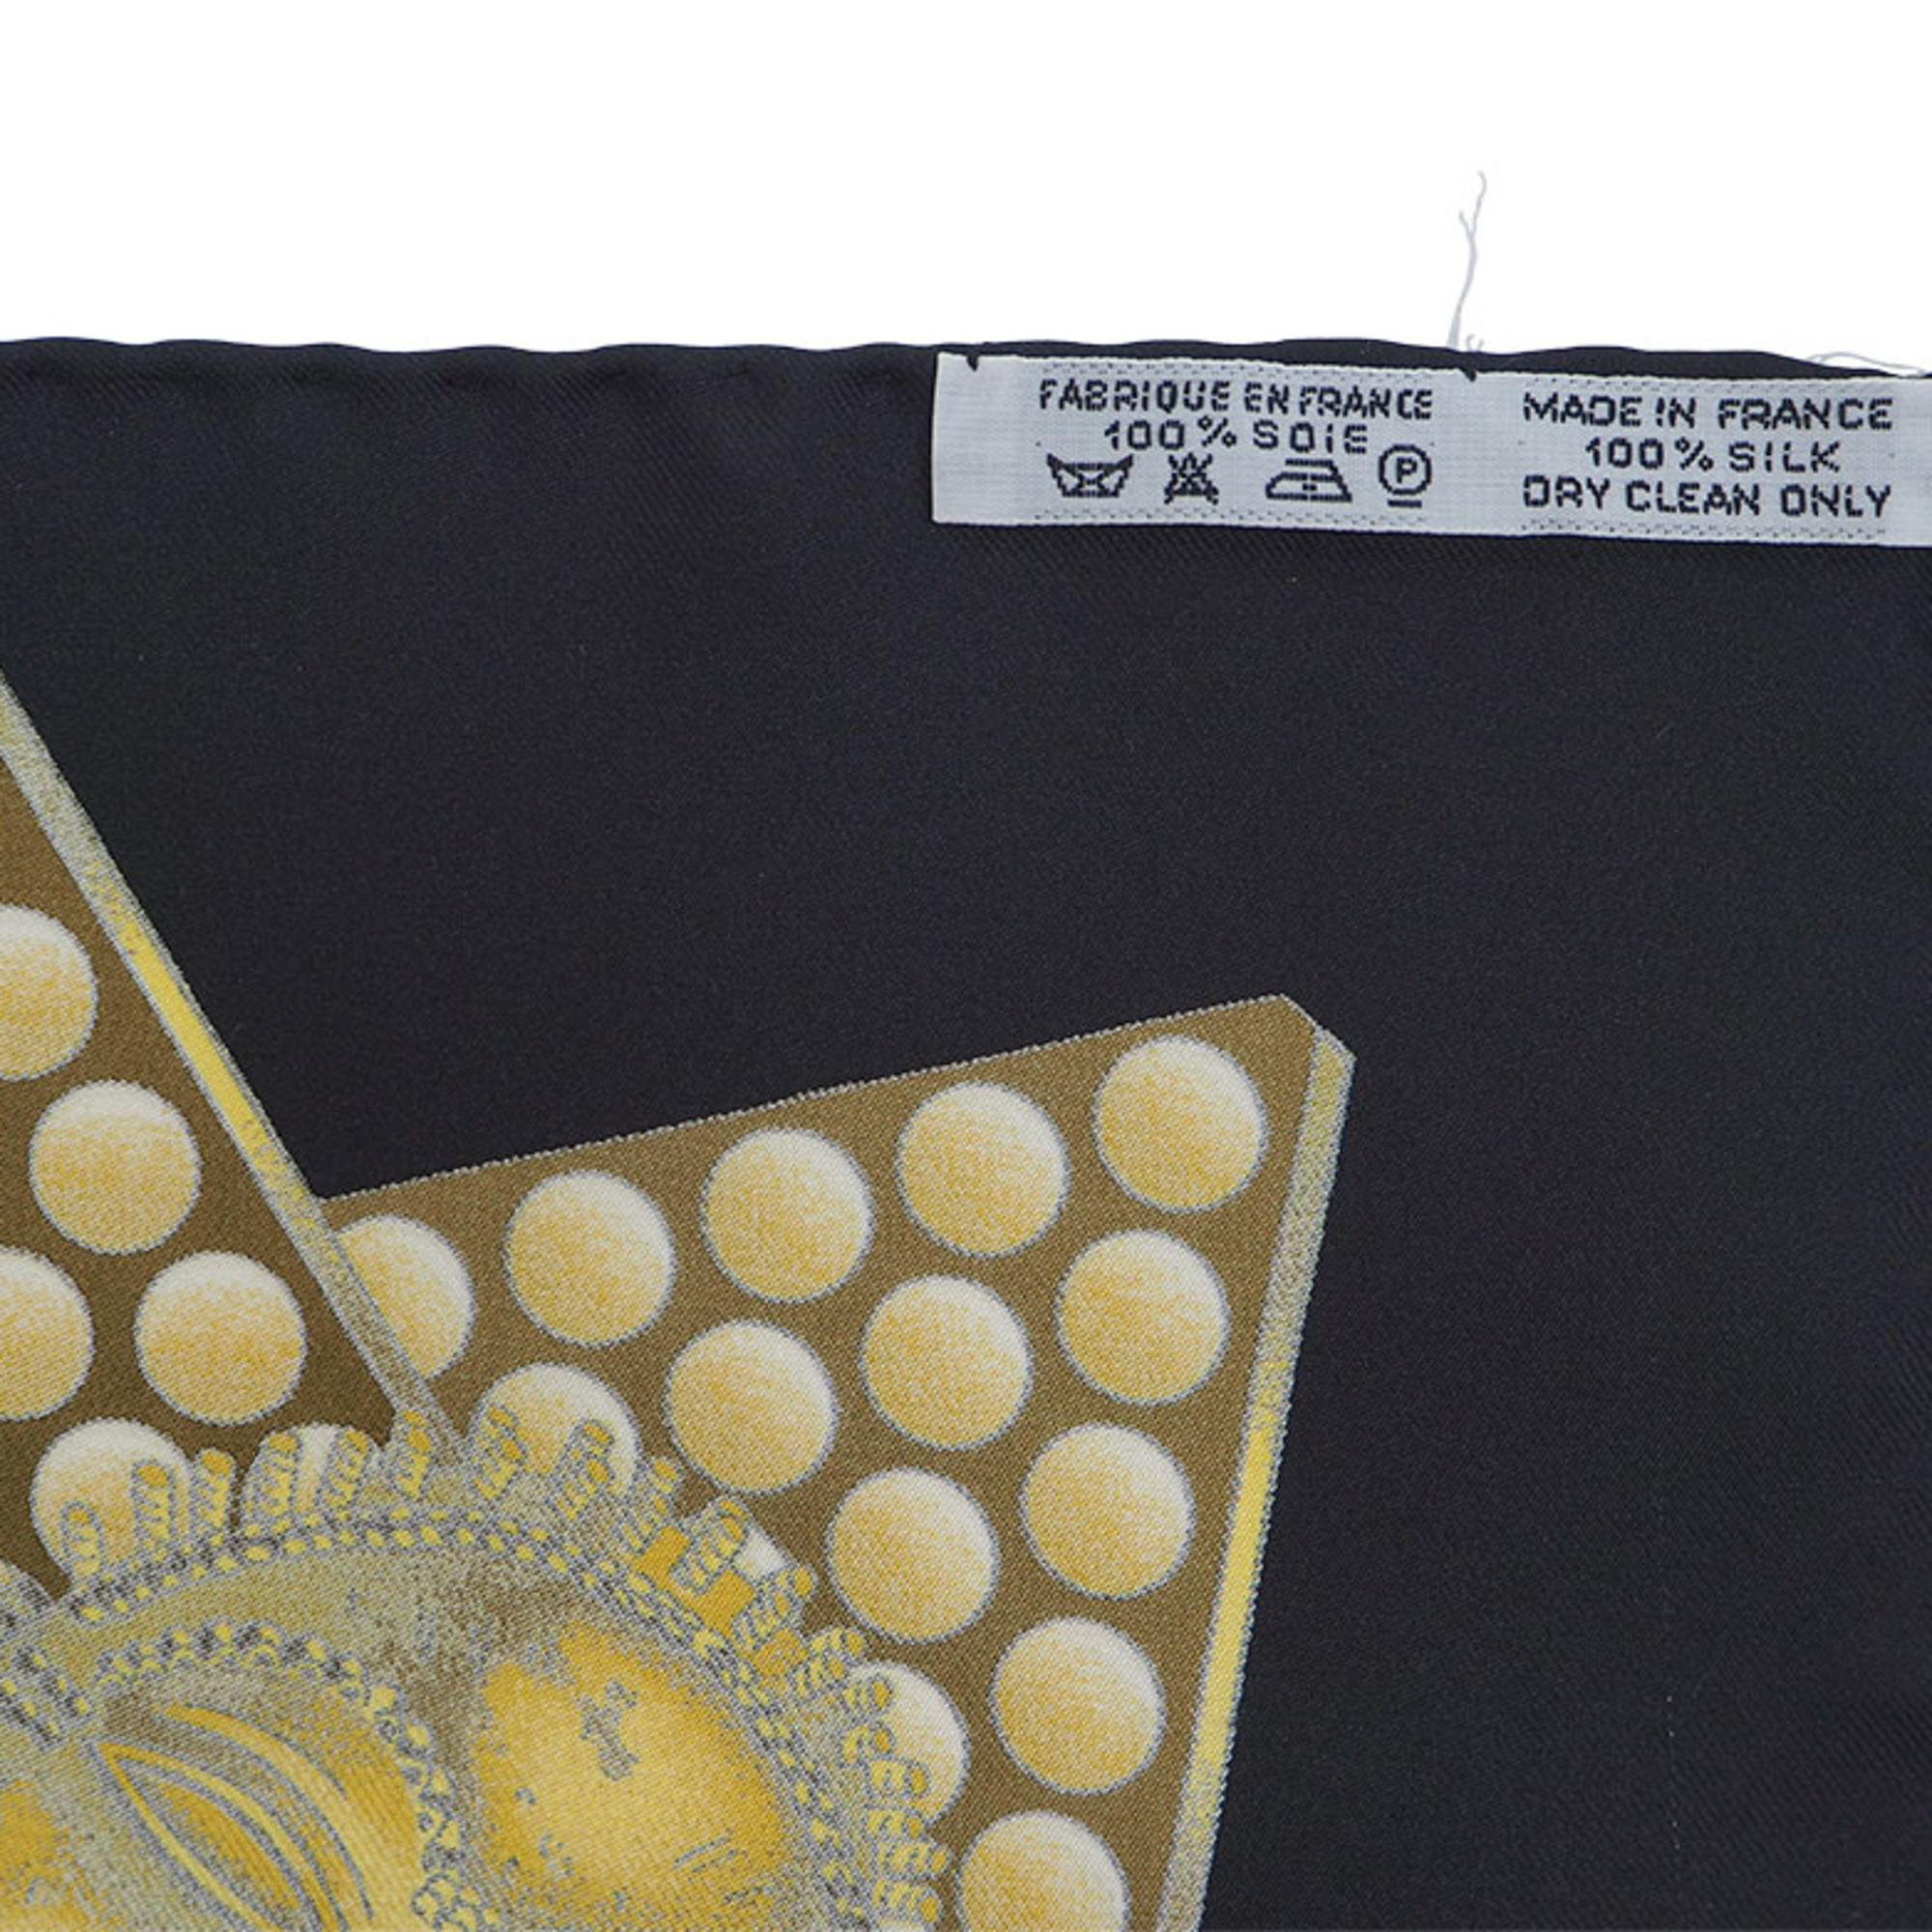 HERMES Hermes Carre 90 L'OR DES CHEFS Gold Black x Yellow Scarf Muffler